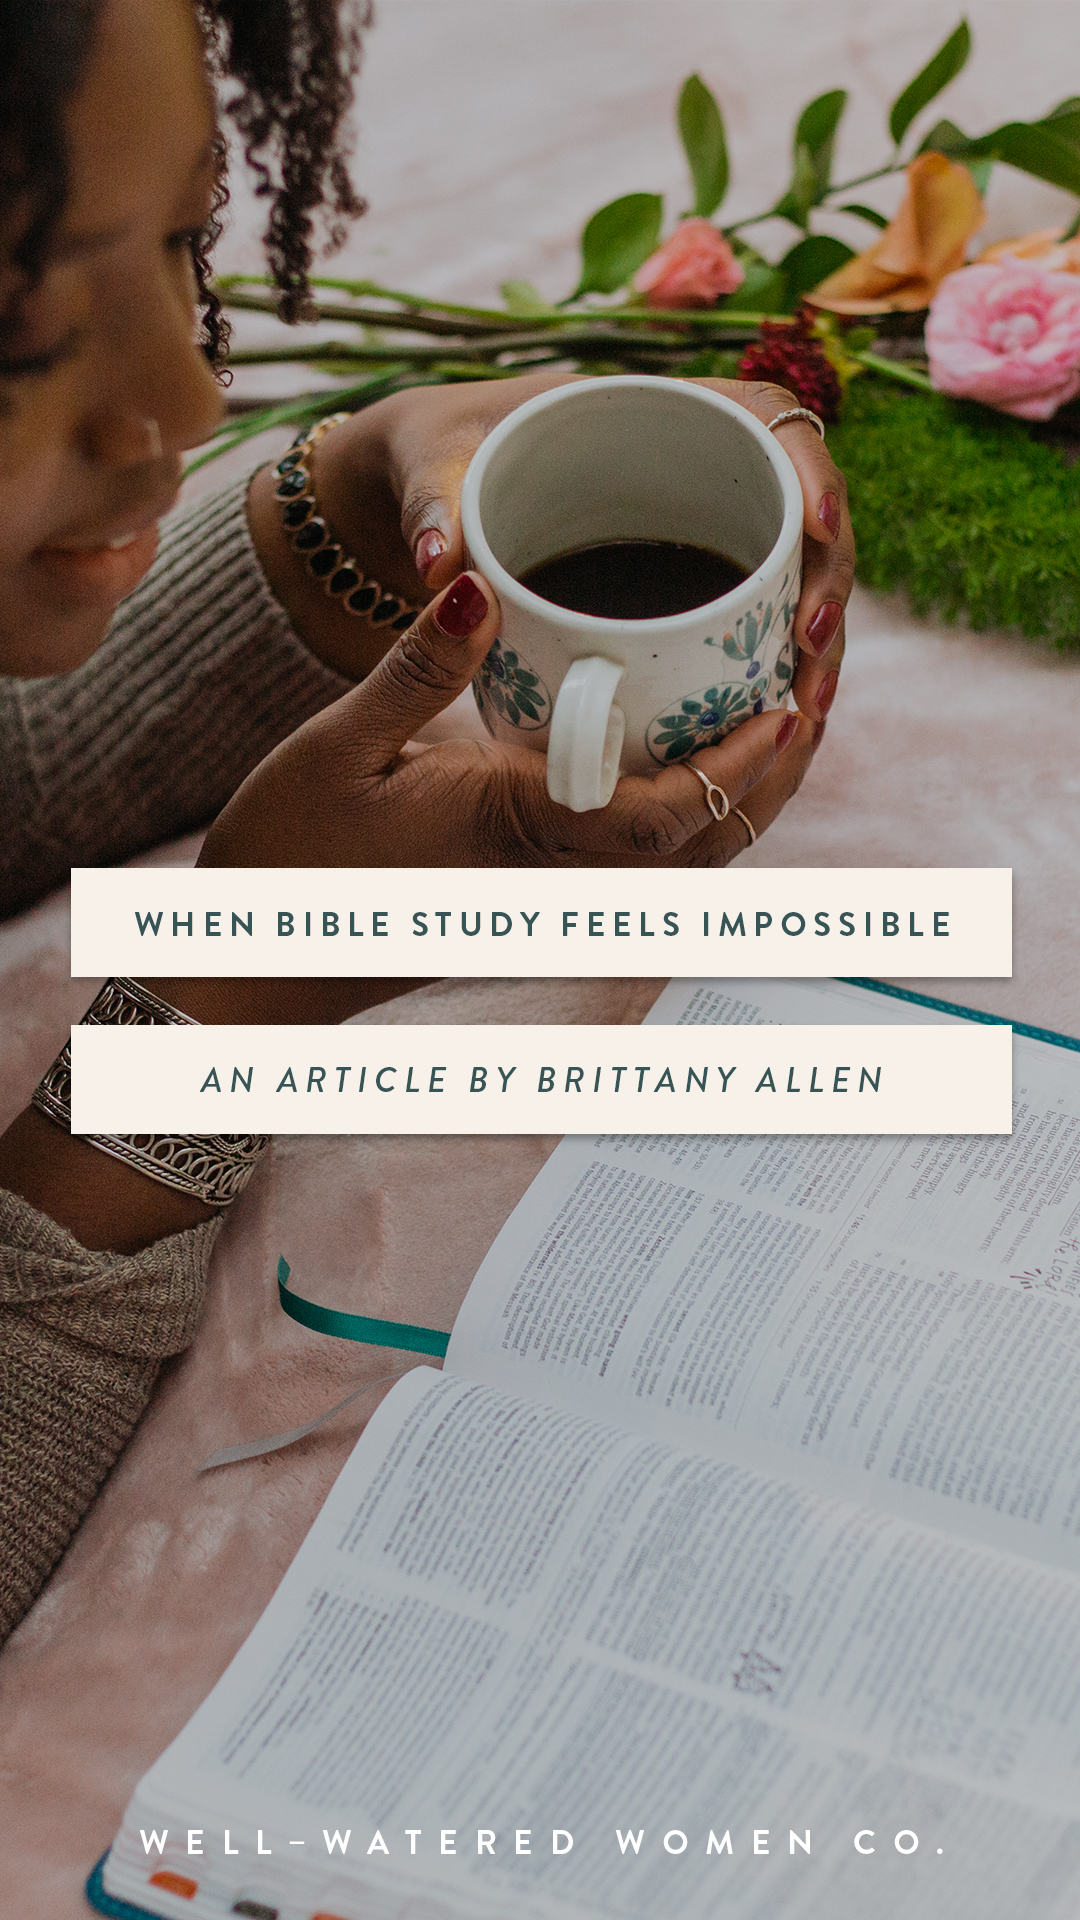 When Bible Study Feels Impossible-an article from Well-Watered Women